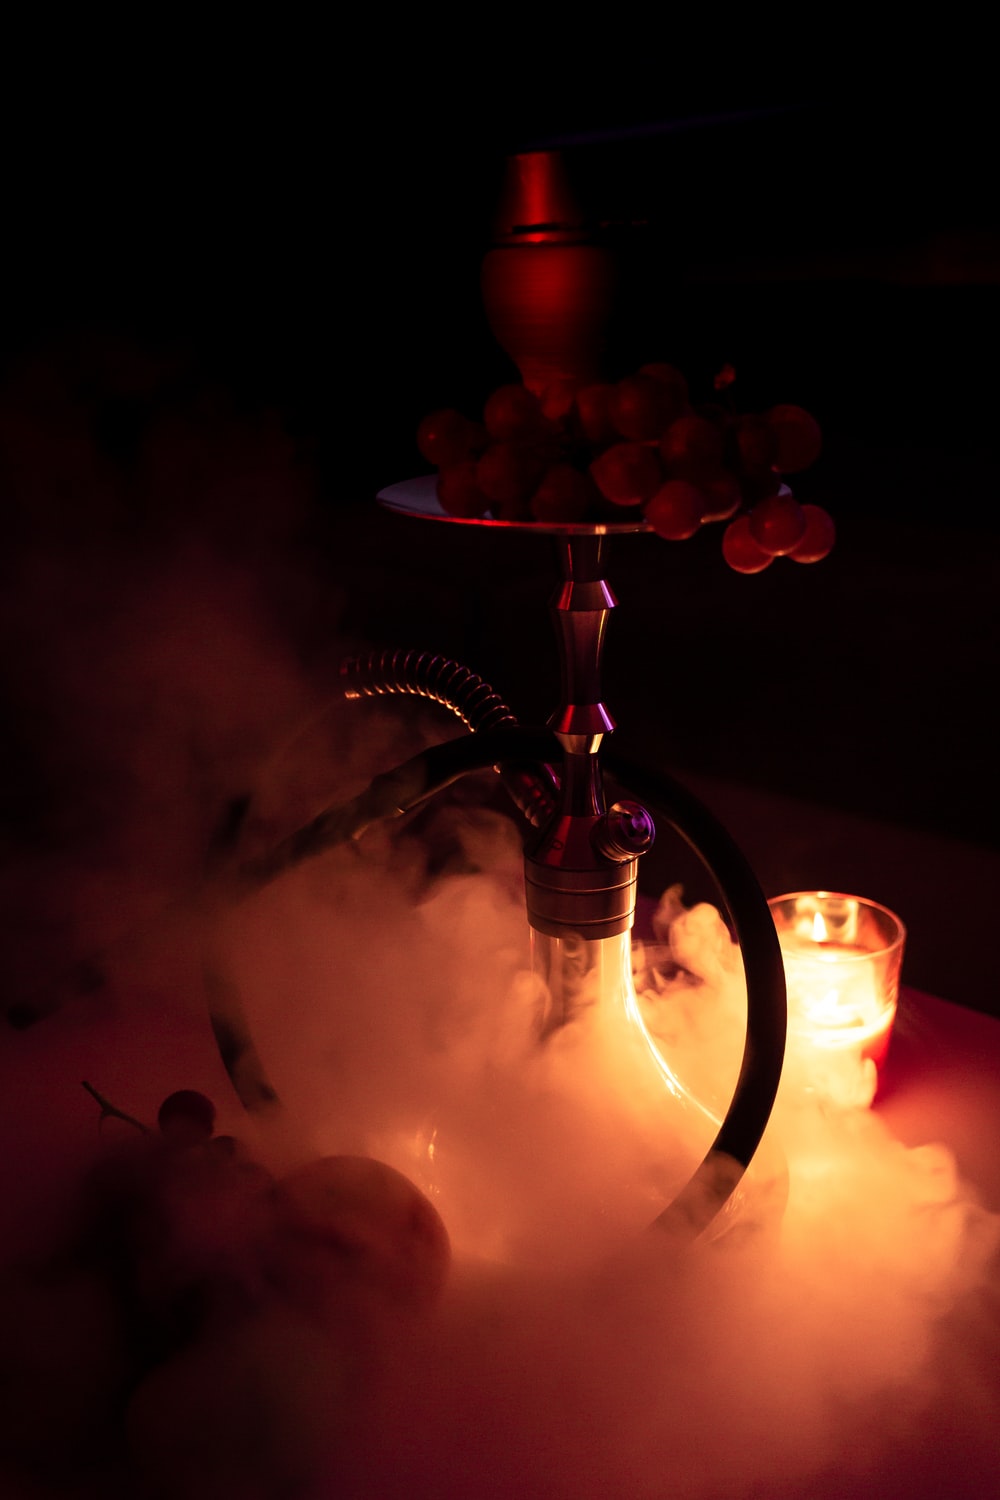 Hookah Picture. Download Free Image